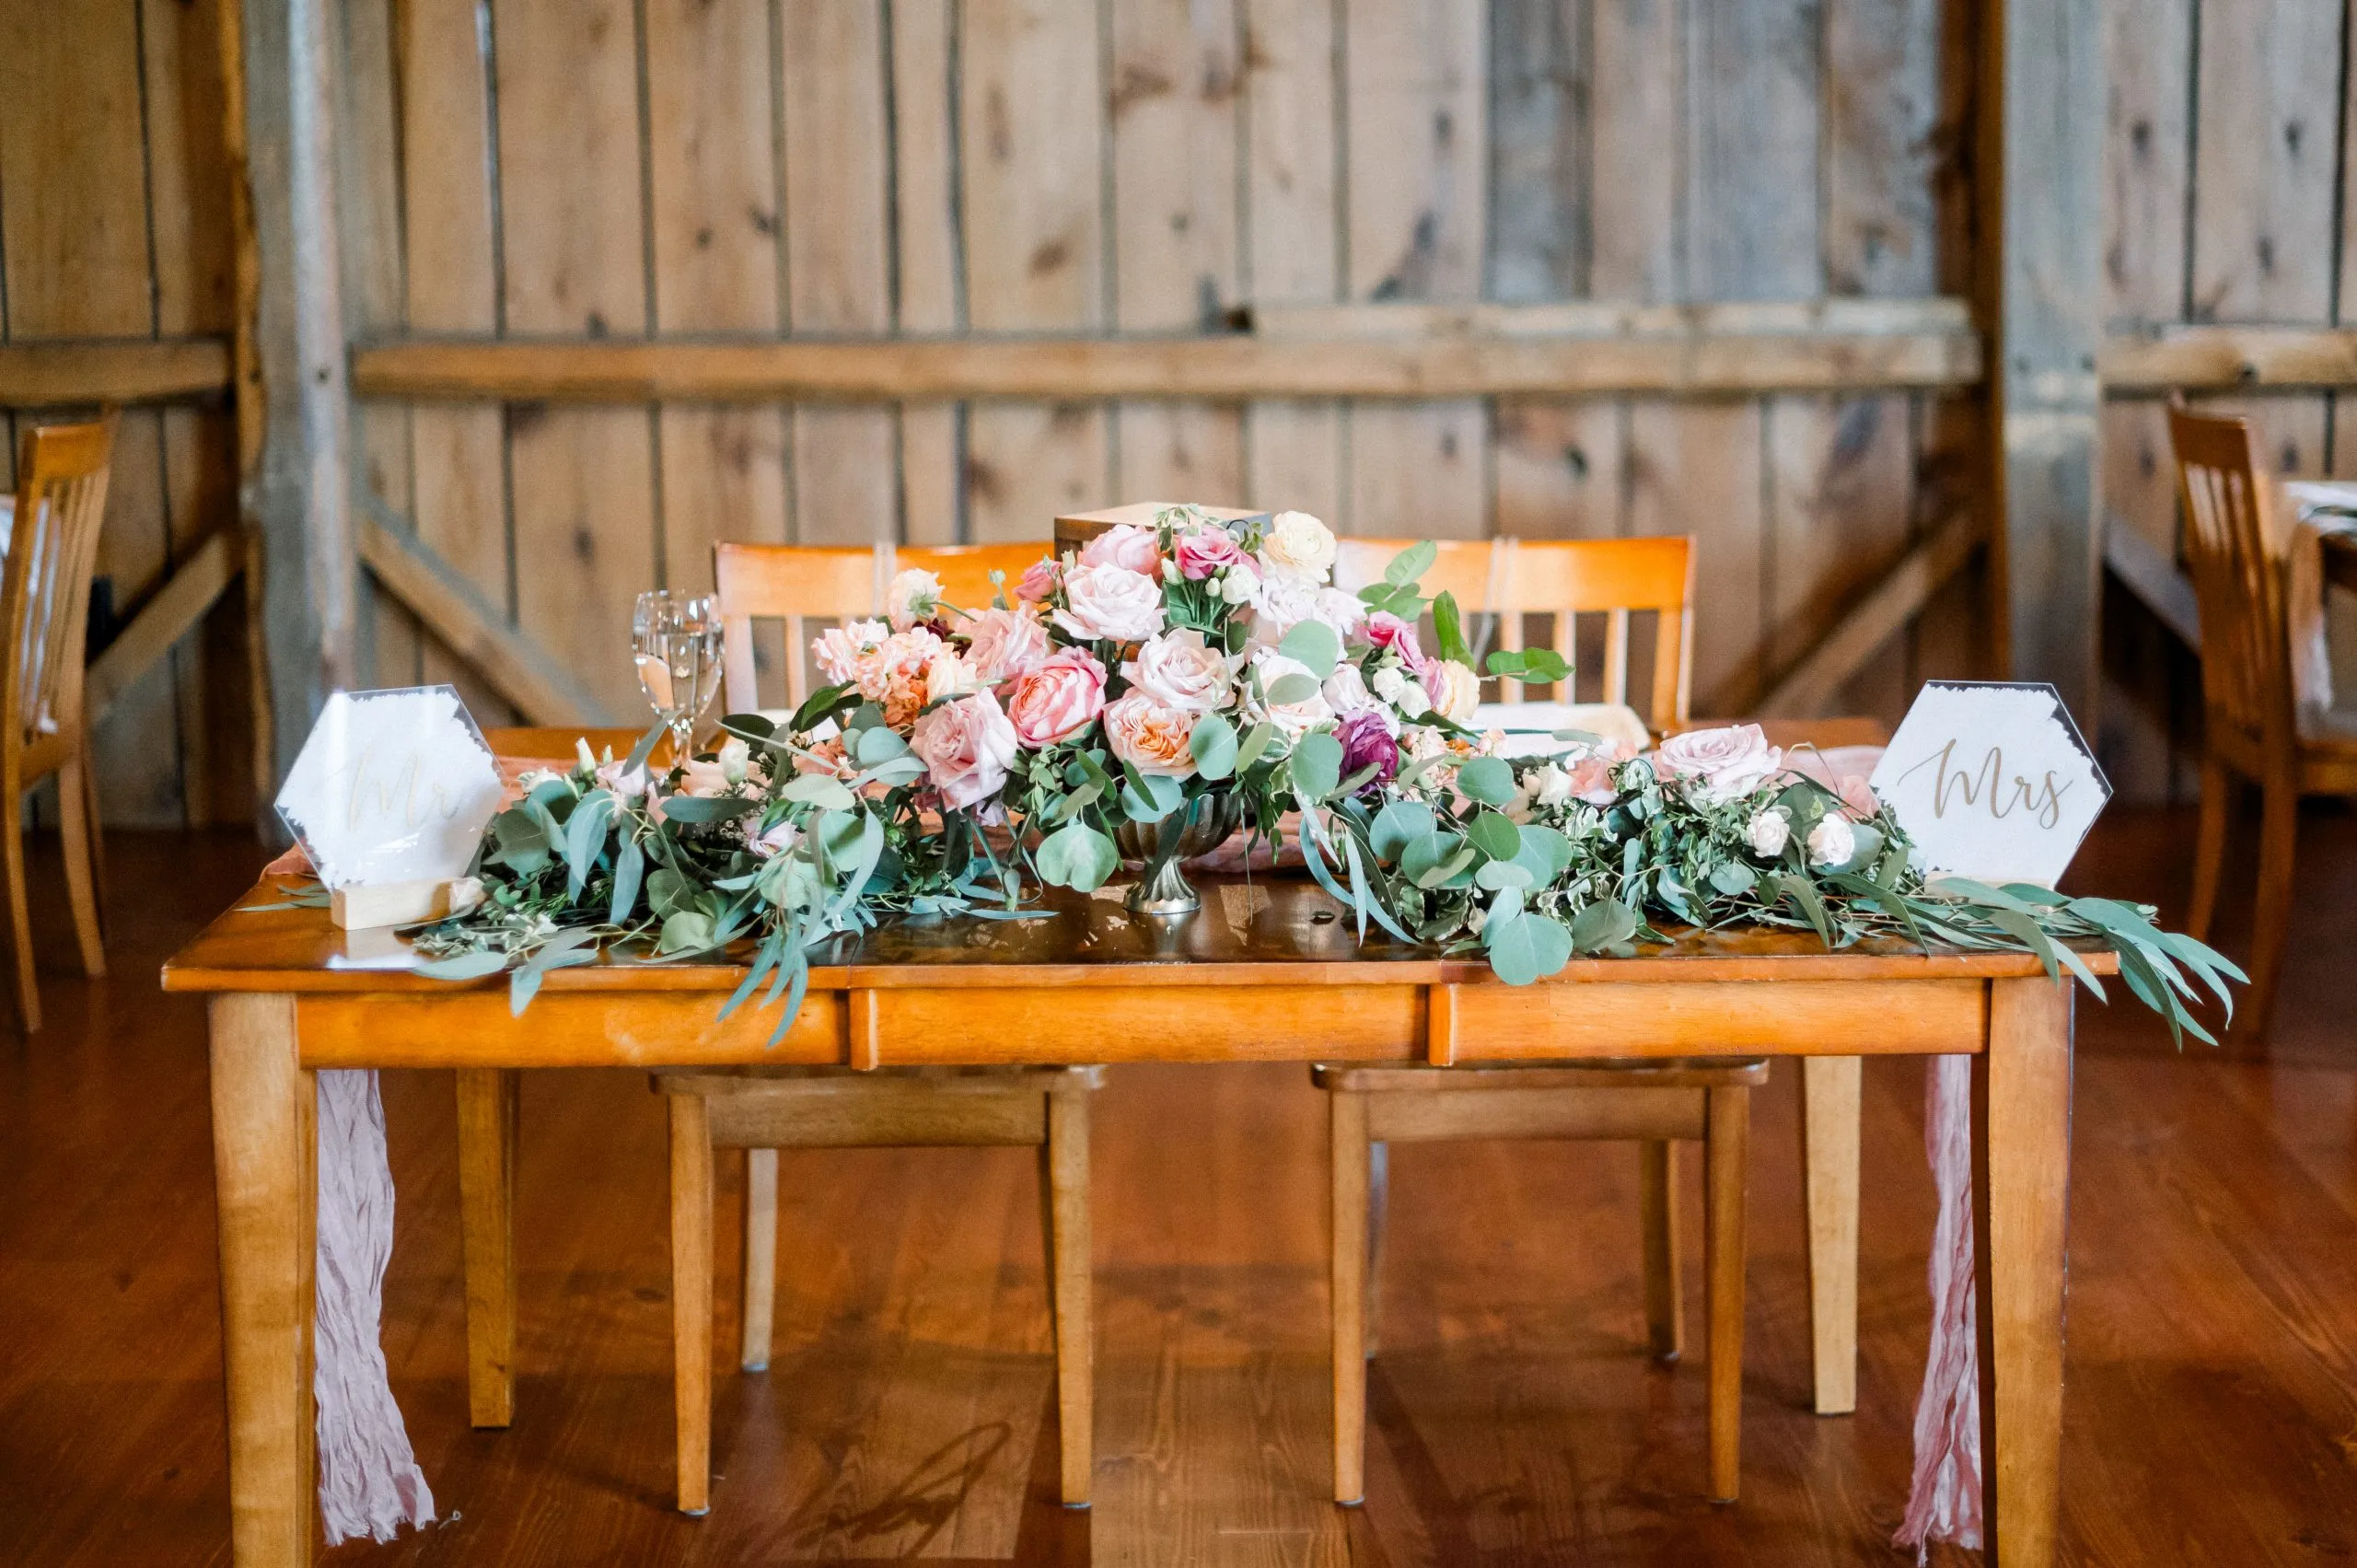 A large floral arrangement with greenery on a table inside a rustic barn at a garden party themed wedding